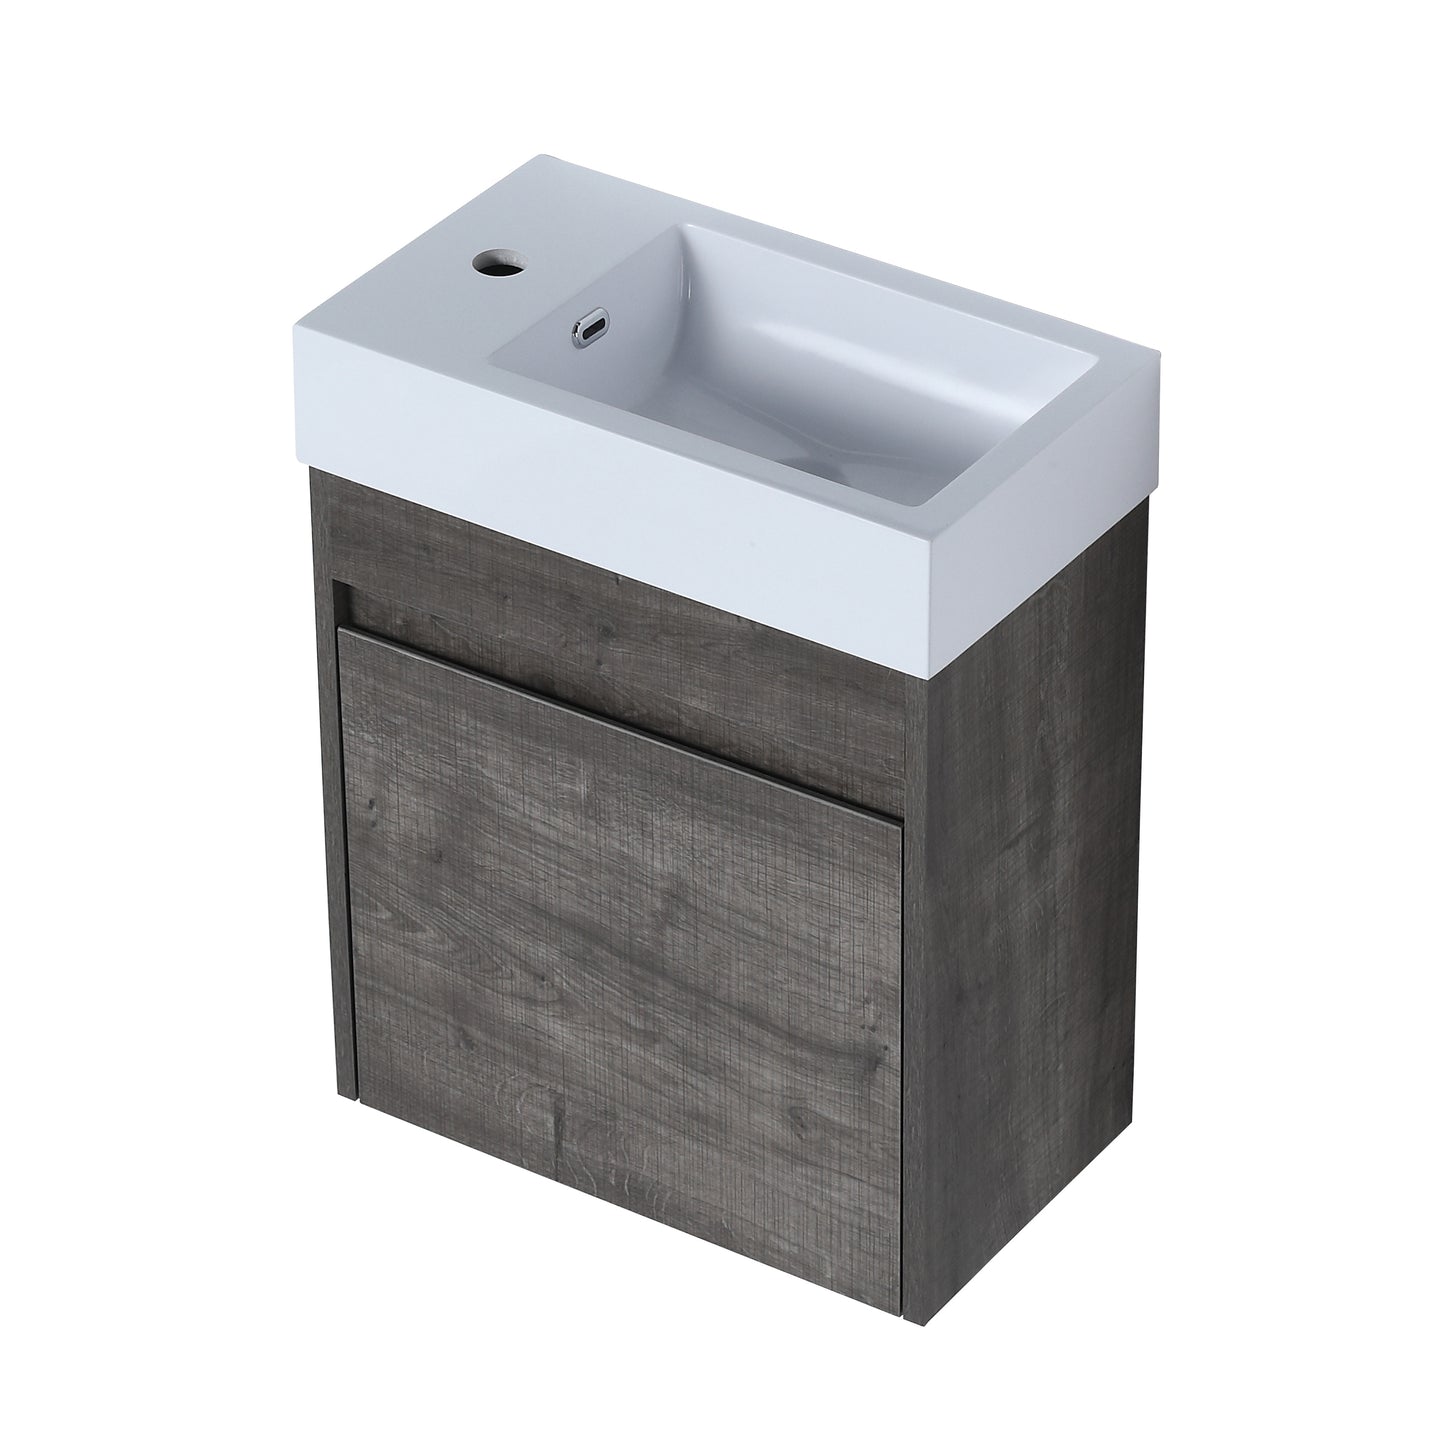 Small Bathroom Vanity With Sink, Float Mounting Modern Design With Soft Close Doors, 18x10-00518 PGO